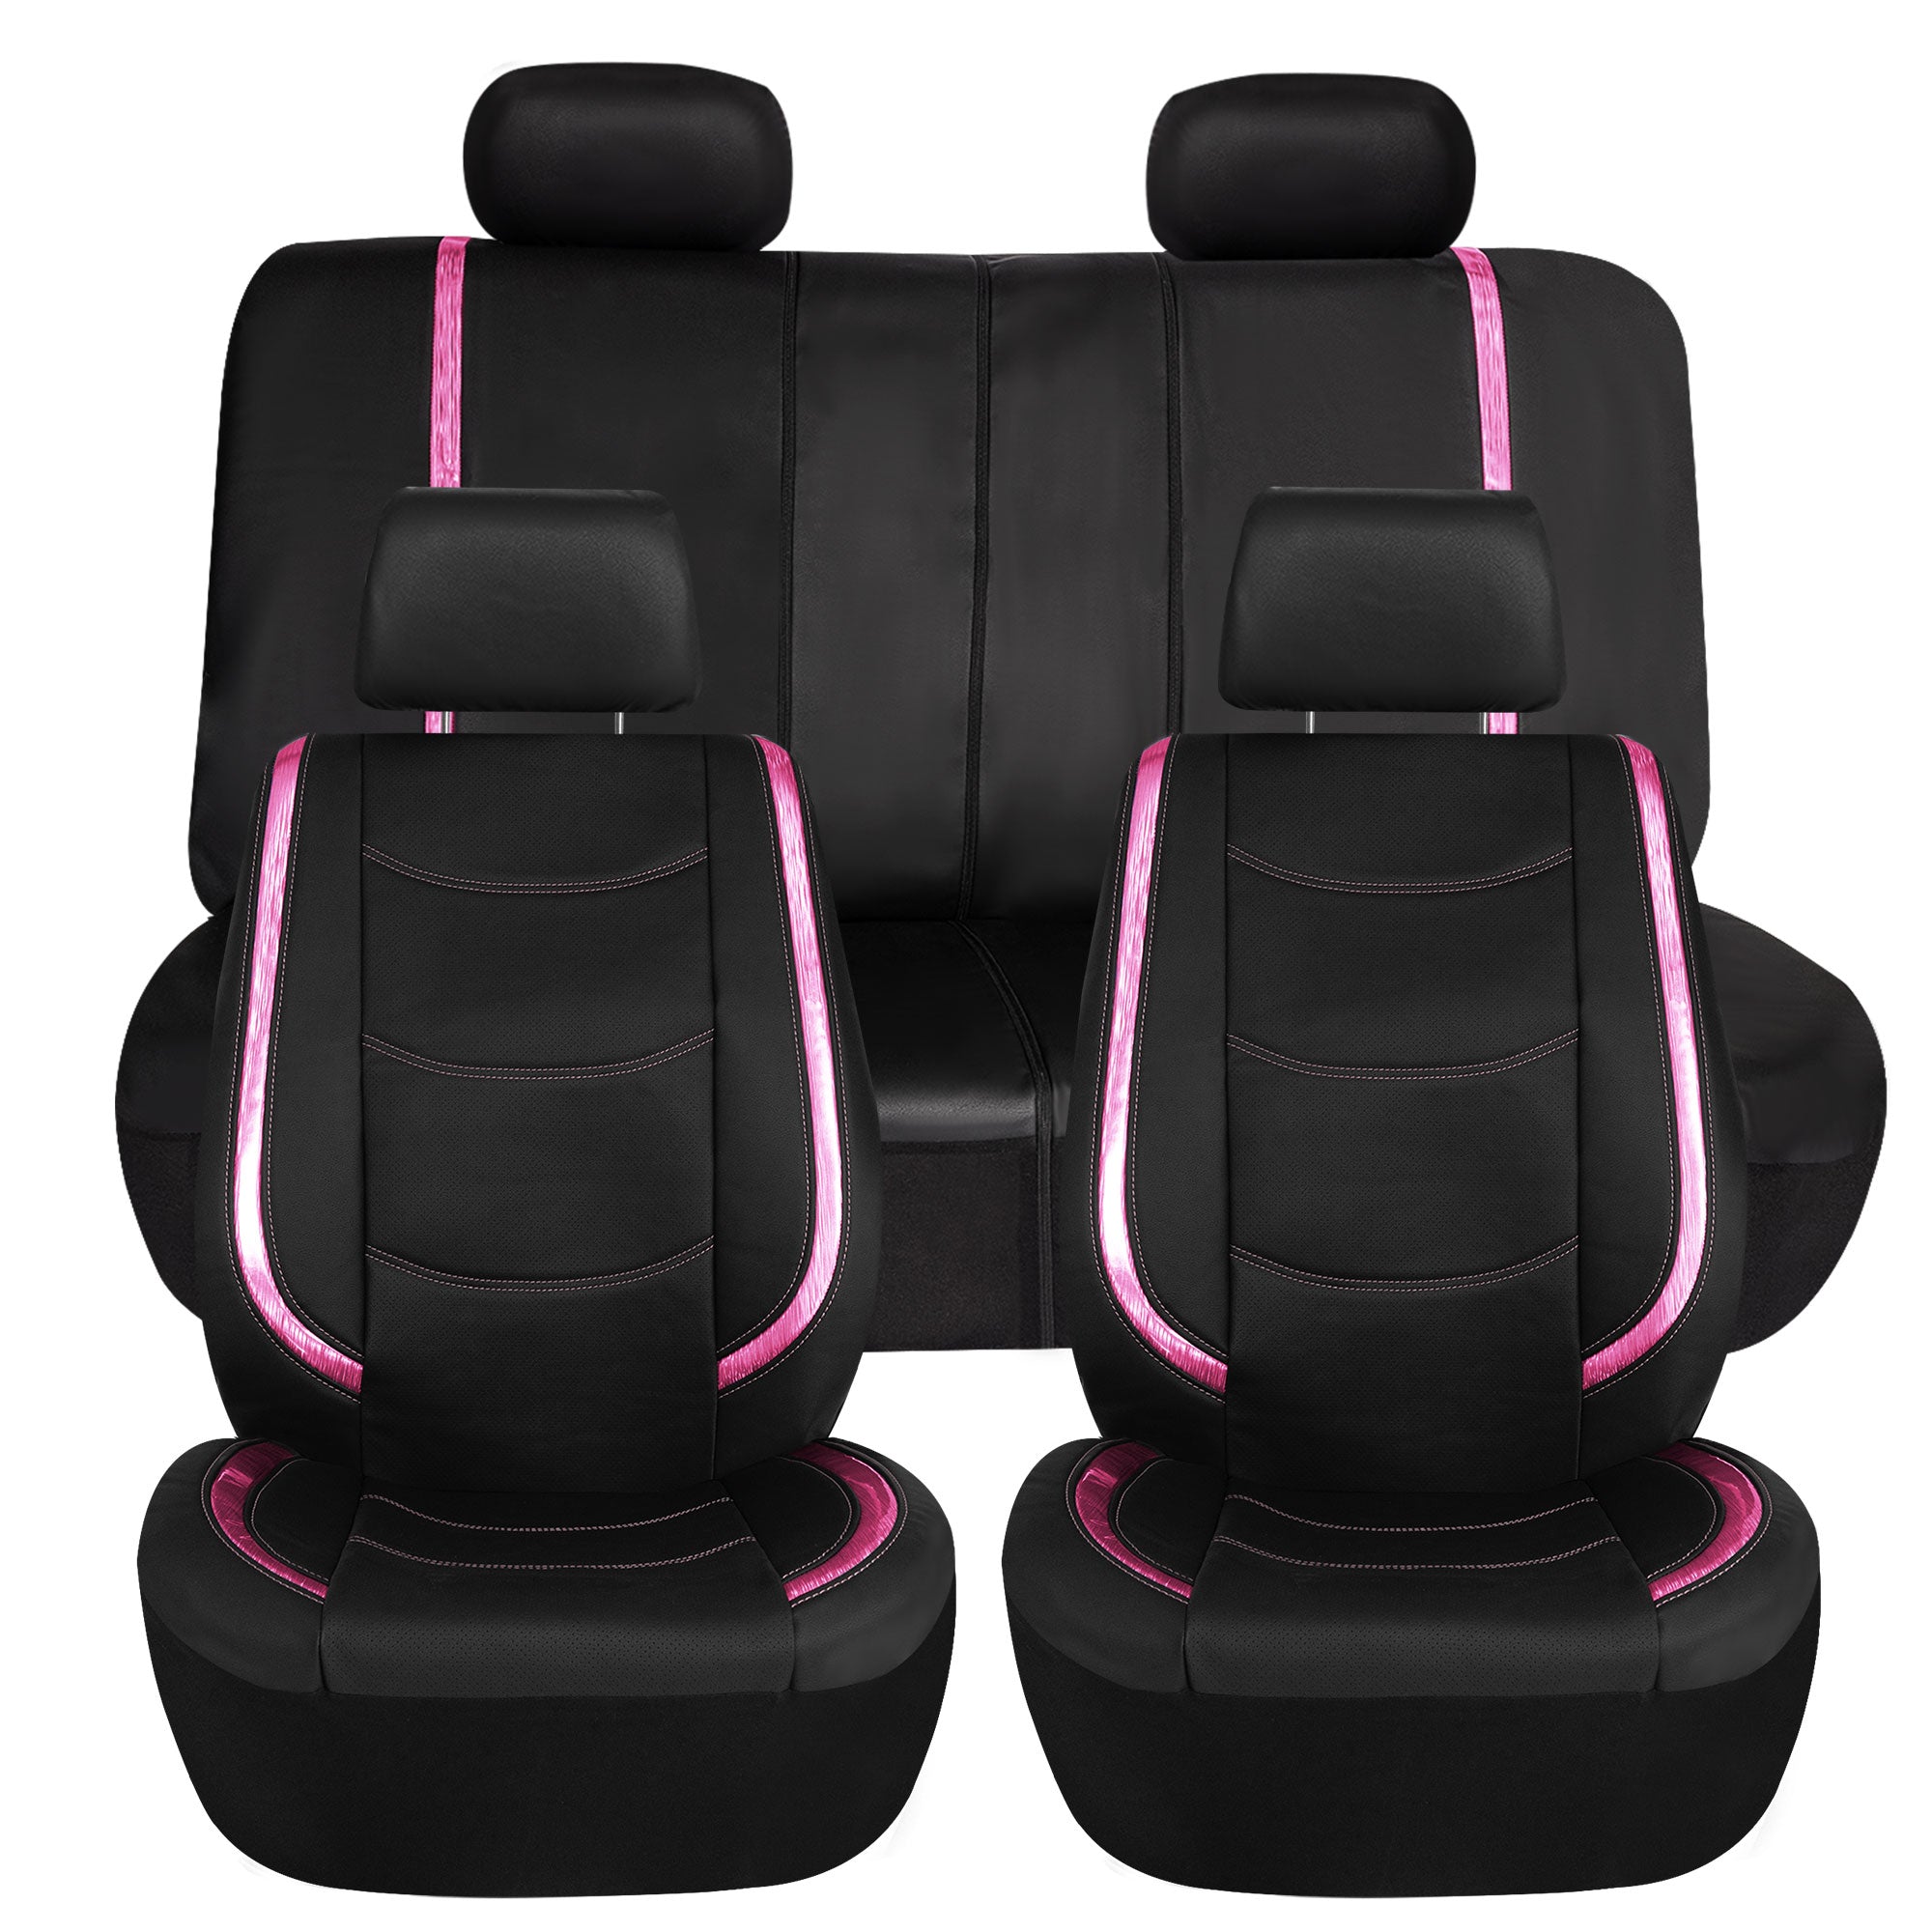 Galaxy13 Metallic Striped Deluxe Leatherette Seat Covers - Full Set Pink